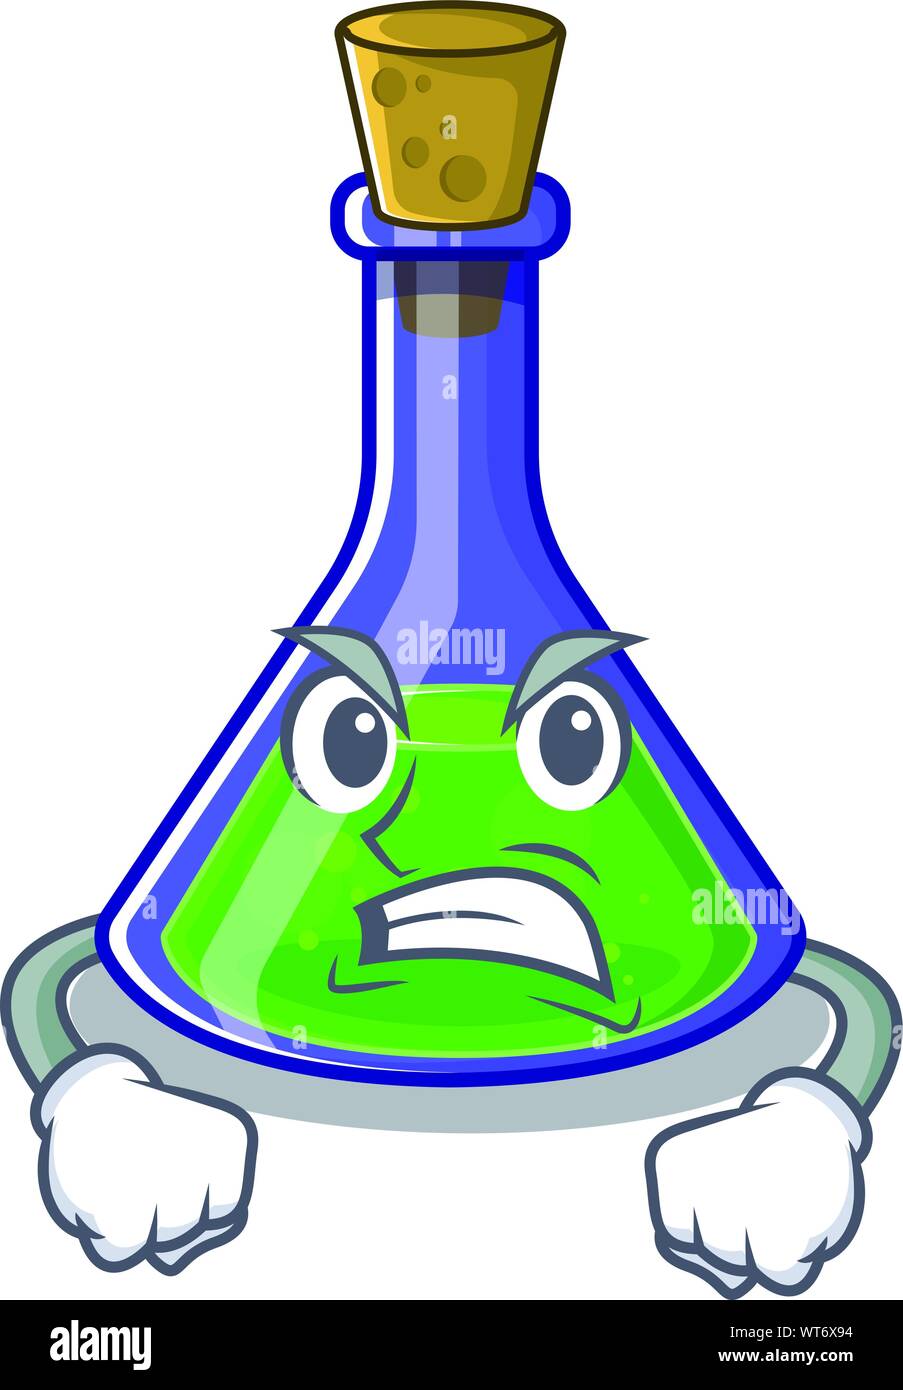 Angry magic potion cartoon shaped in character vector illustration Stock Vector